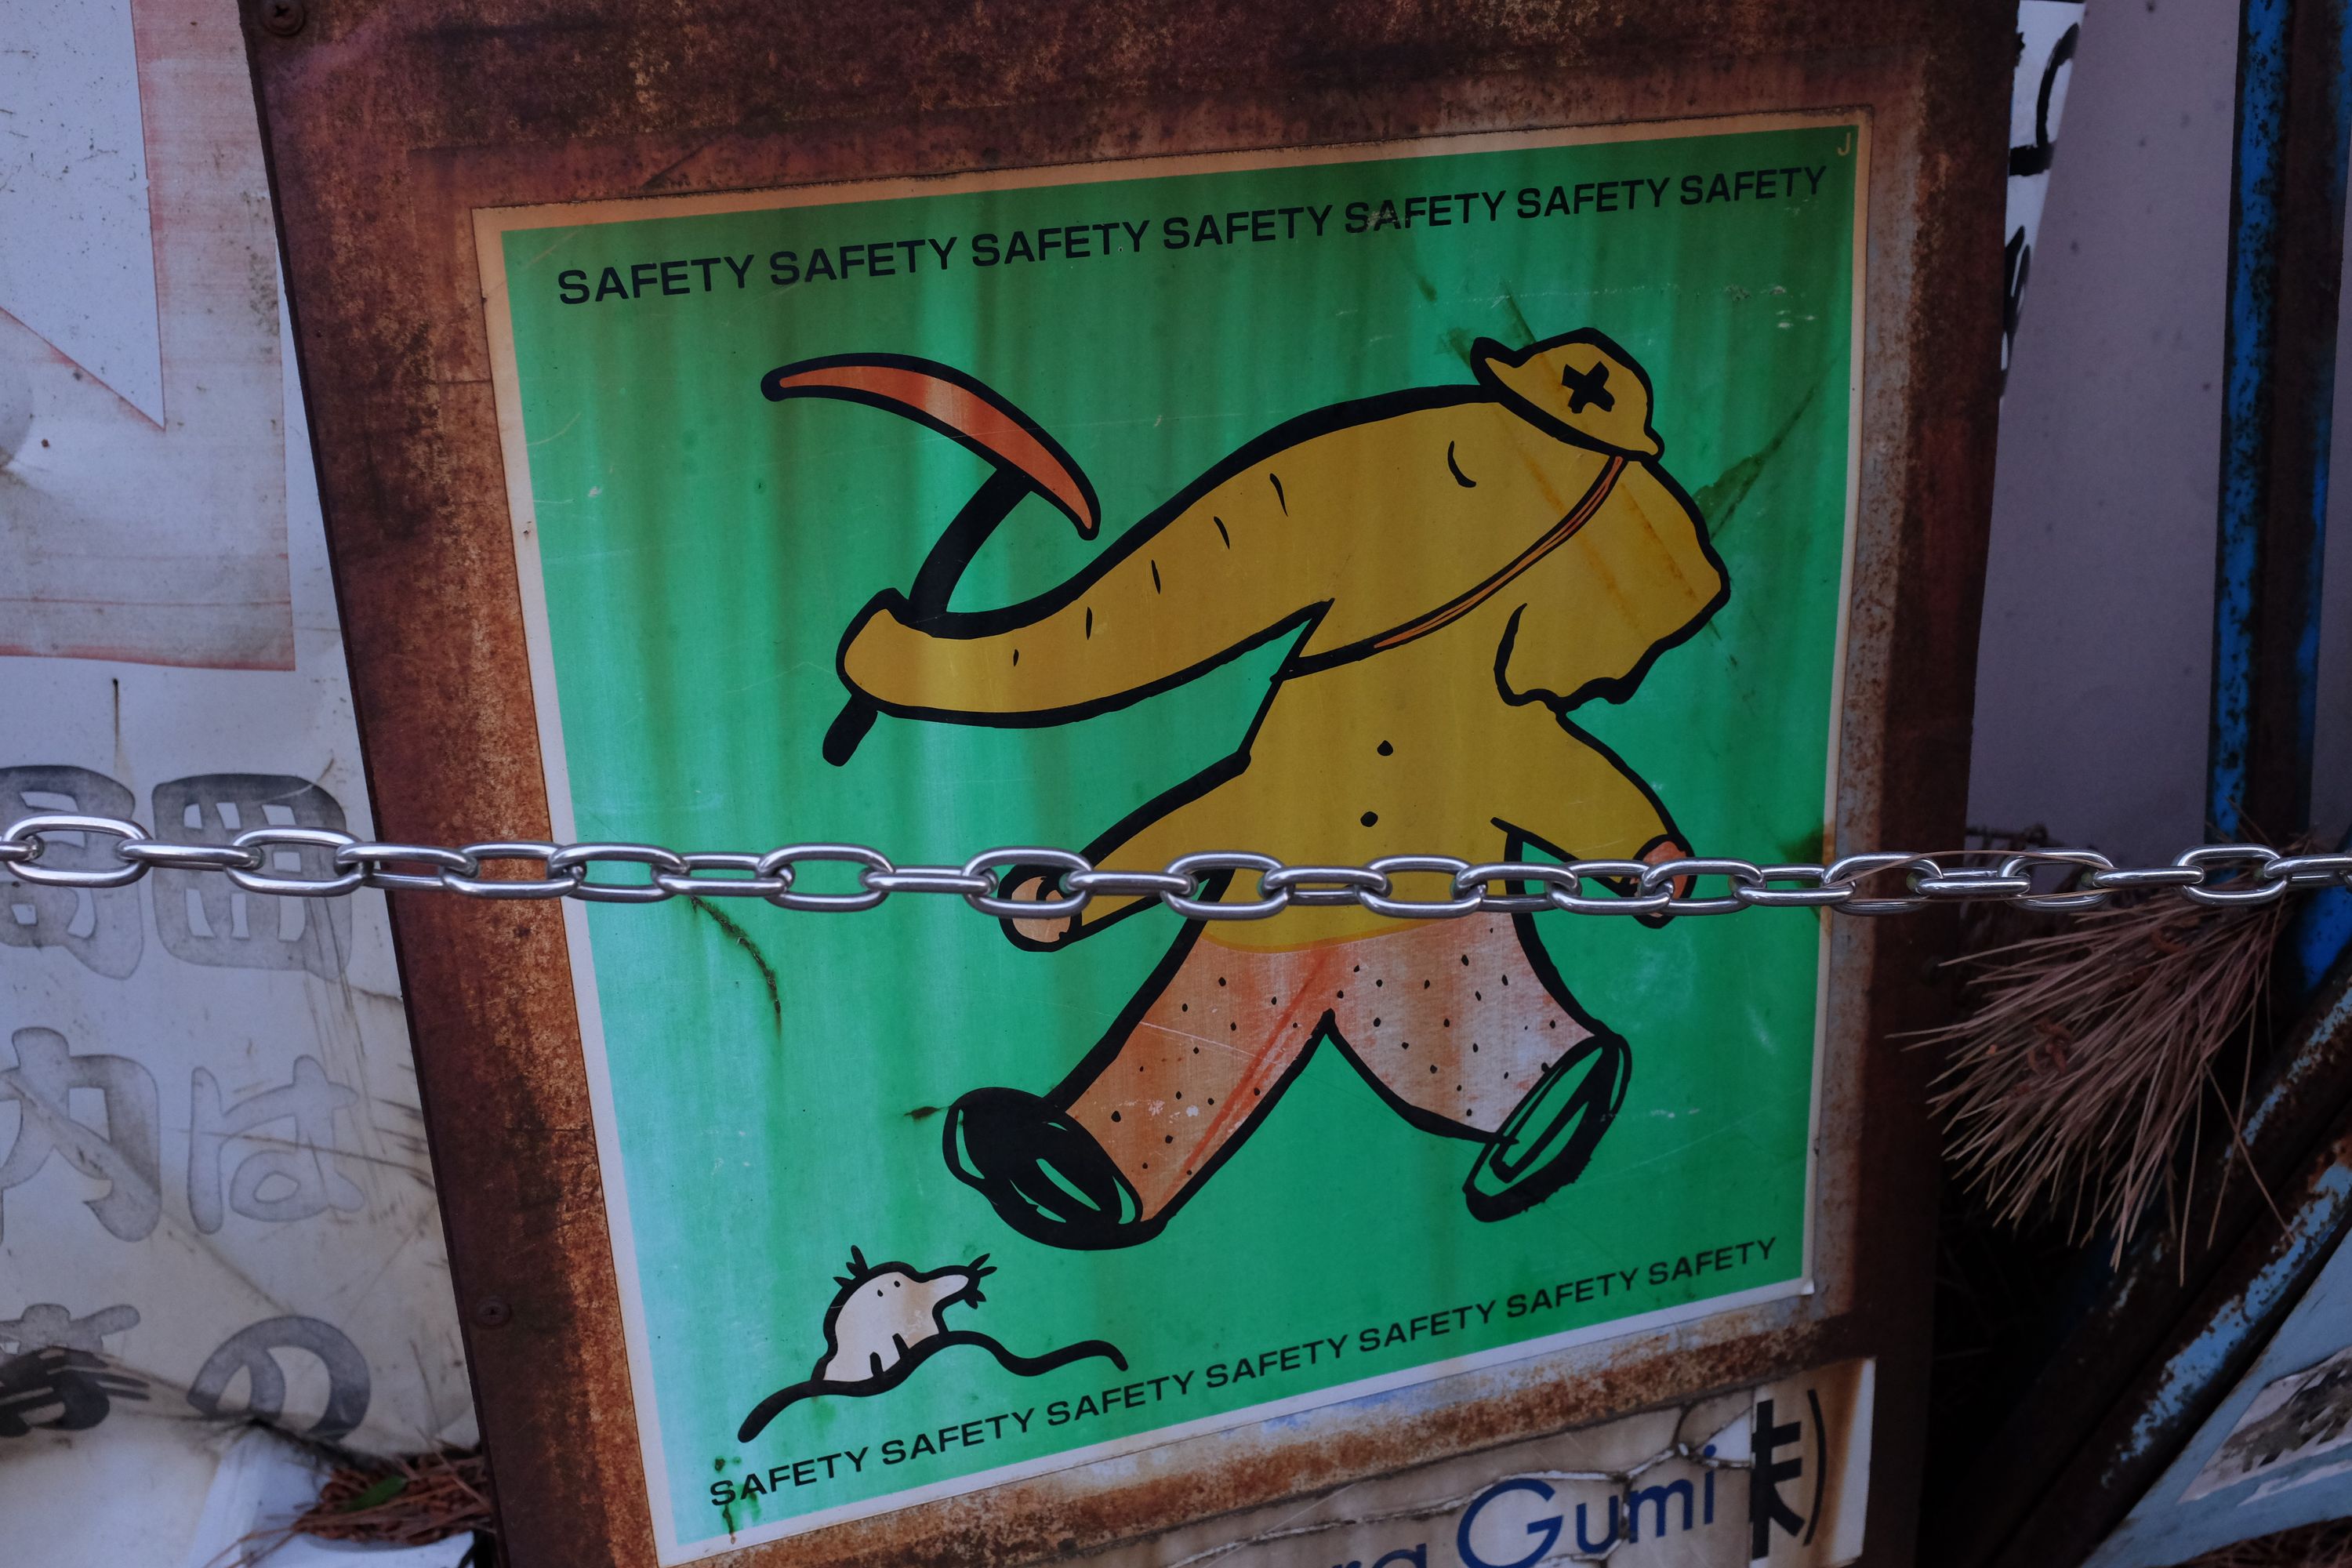 Sign of an elephant dressed as a construction worker, carrying a pickaxe in its trunk.